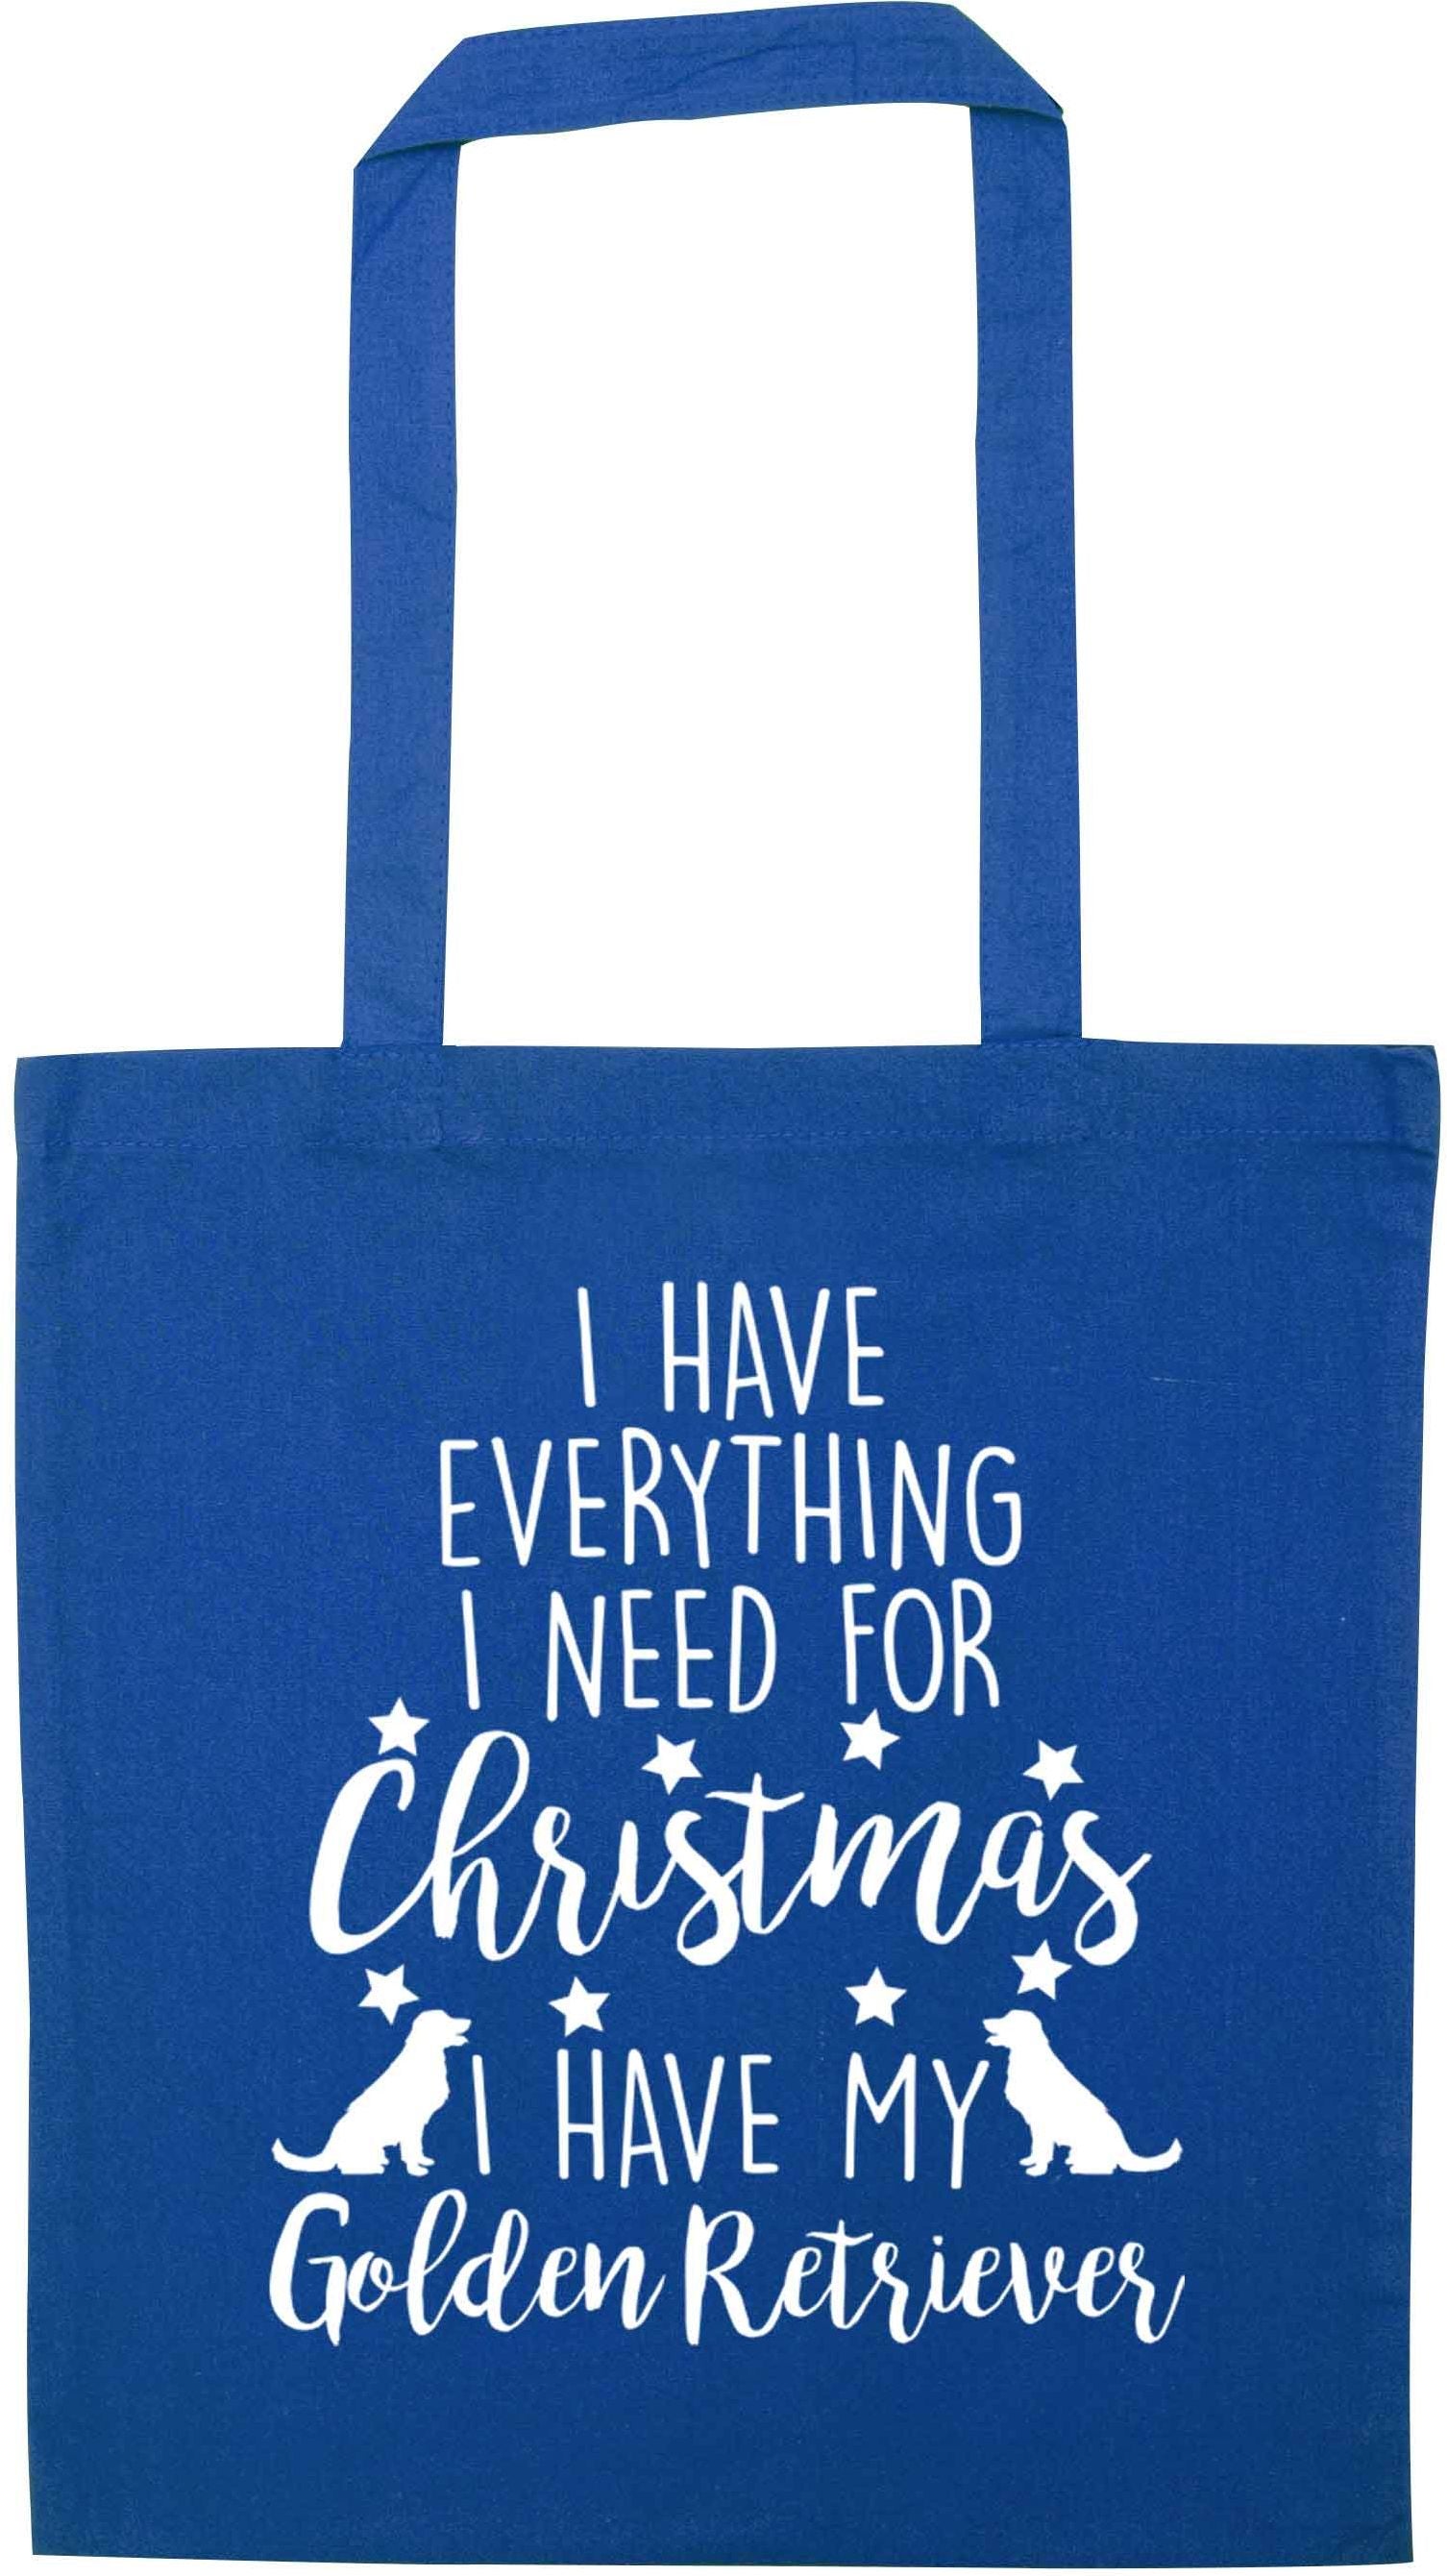 I have everything I need for Christmas I have my golden retriever blue tote bag